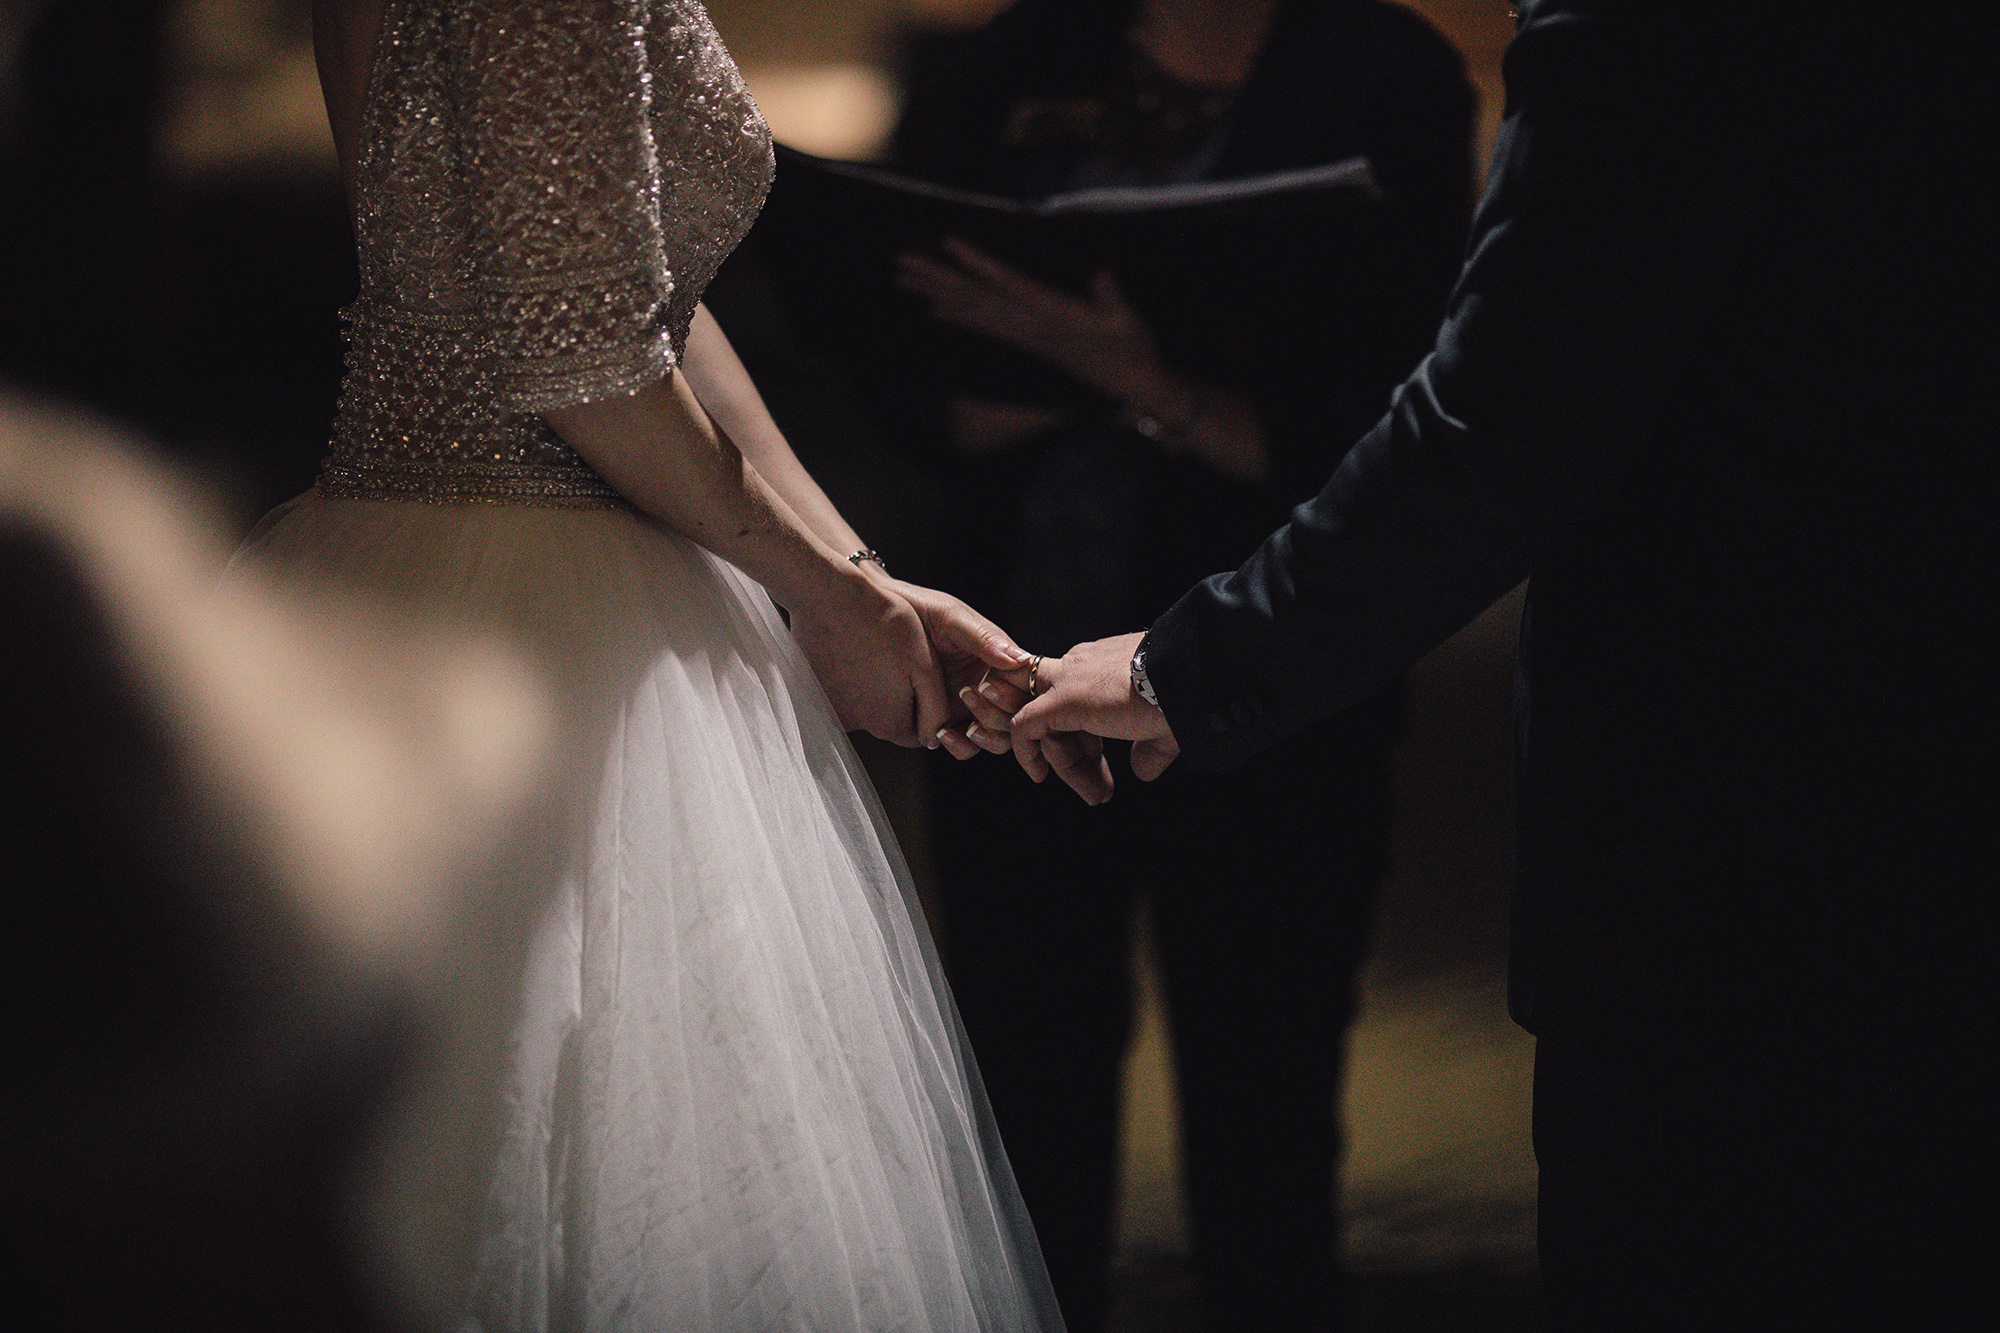 Kate and Sam marry by candlelight at vintage evening wedding | Easy ...